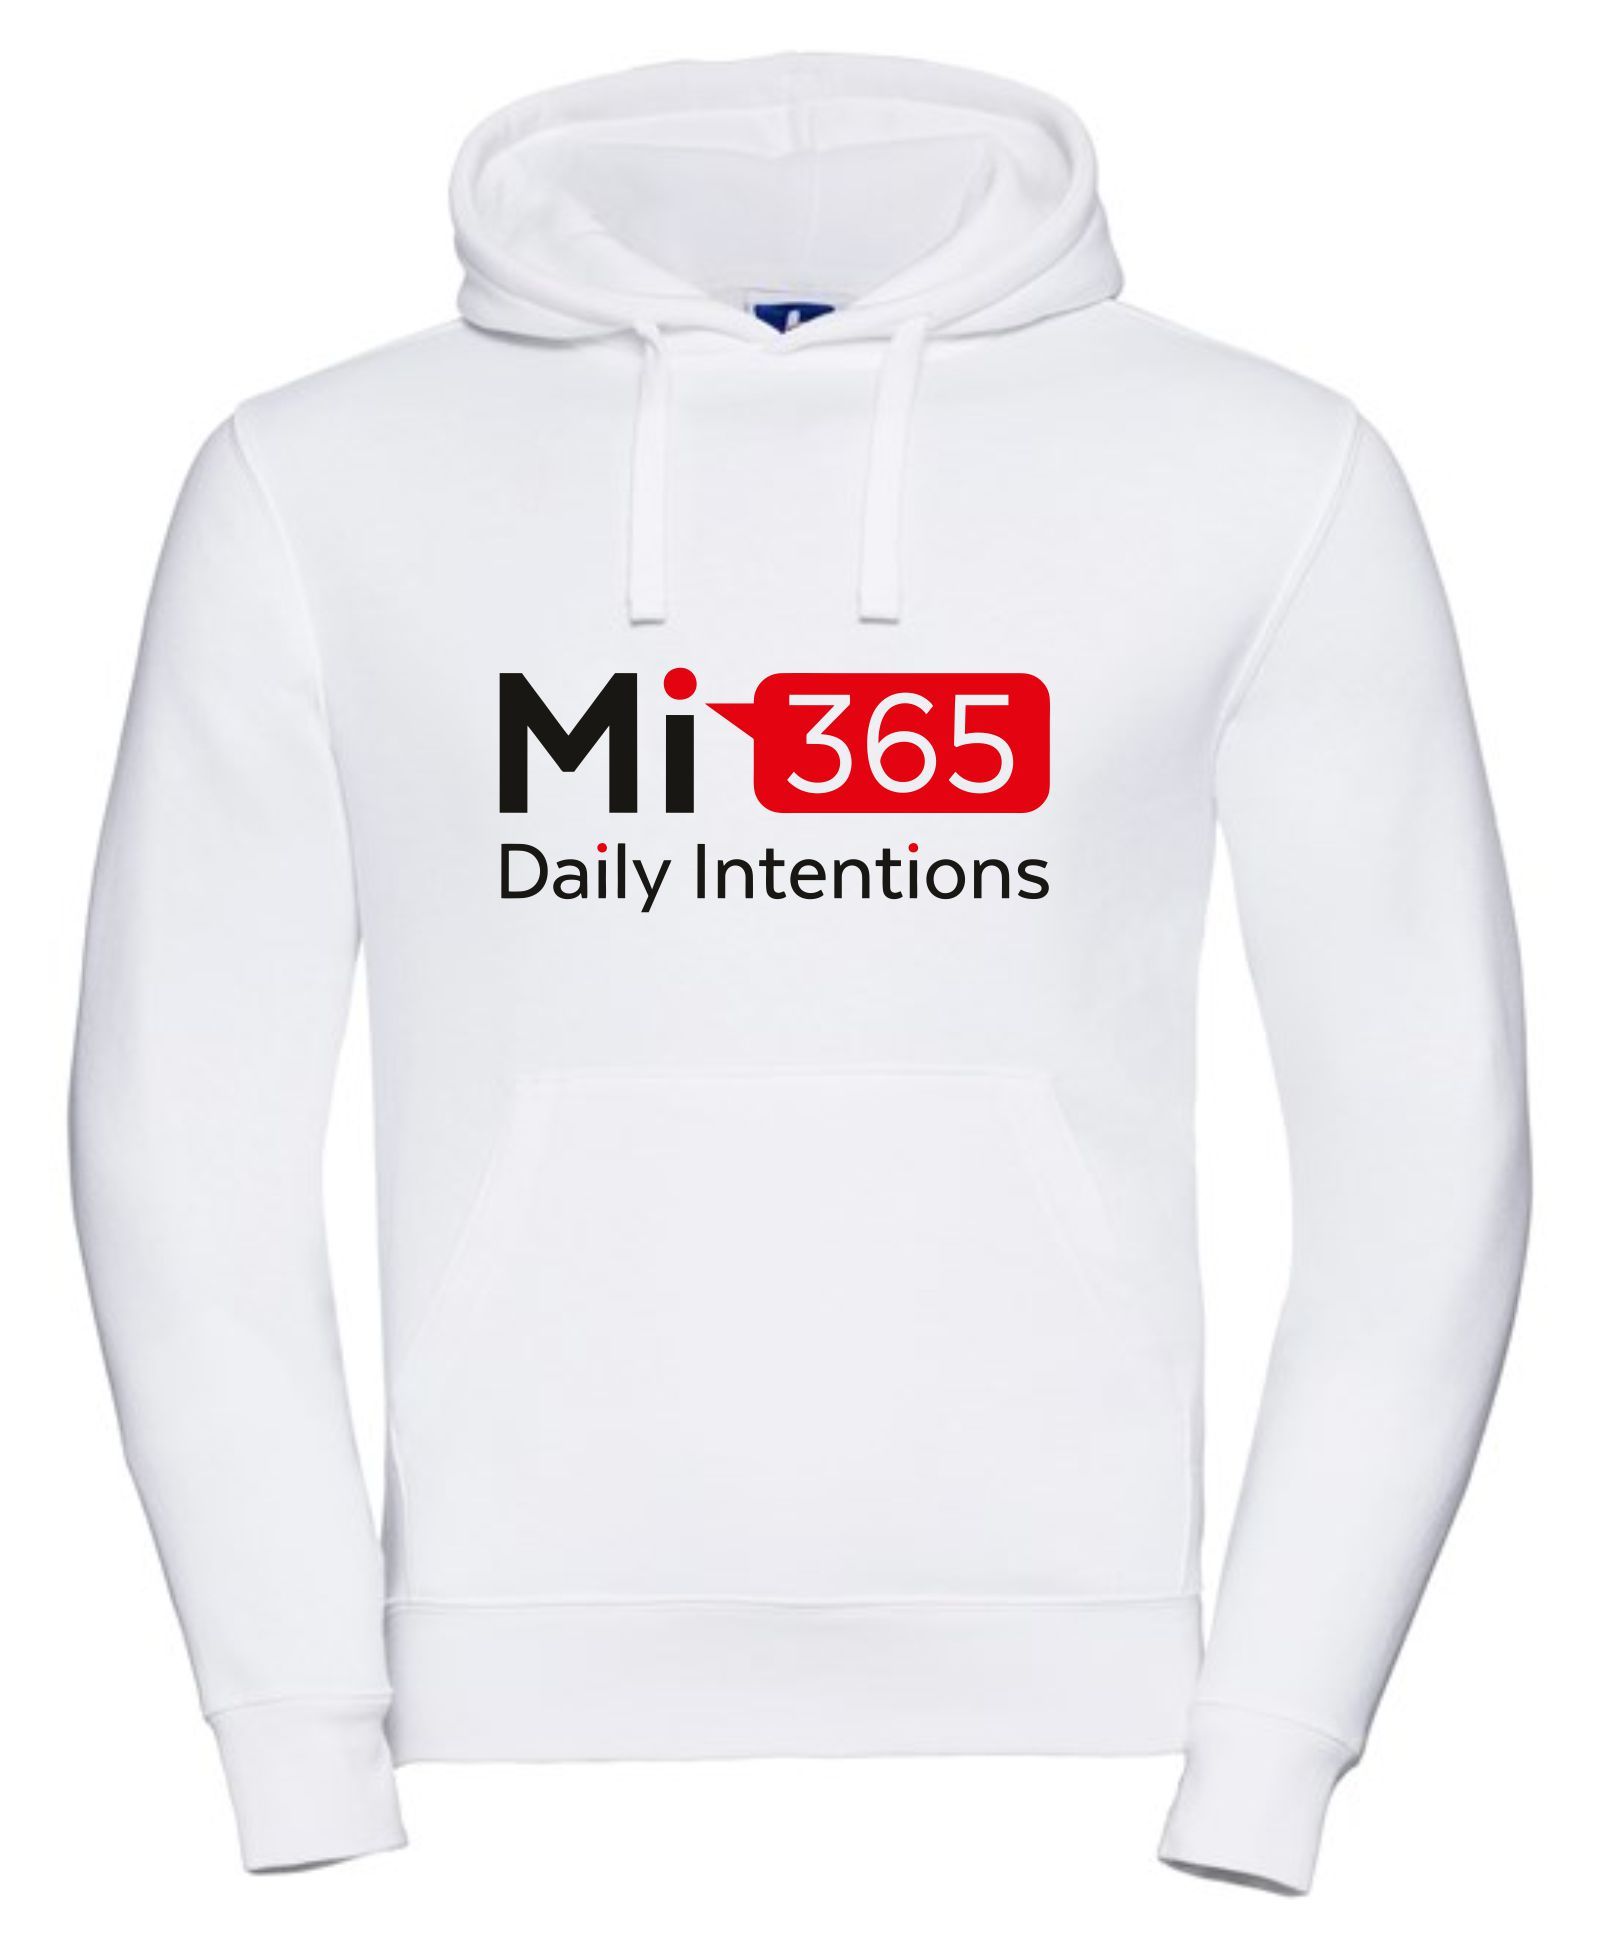 Mi365 Daily Intentions - Hoodie